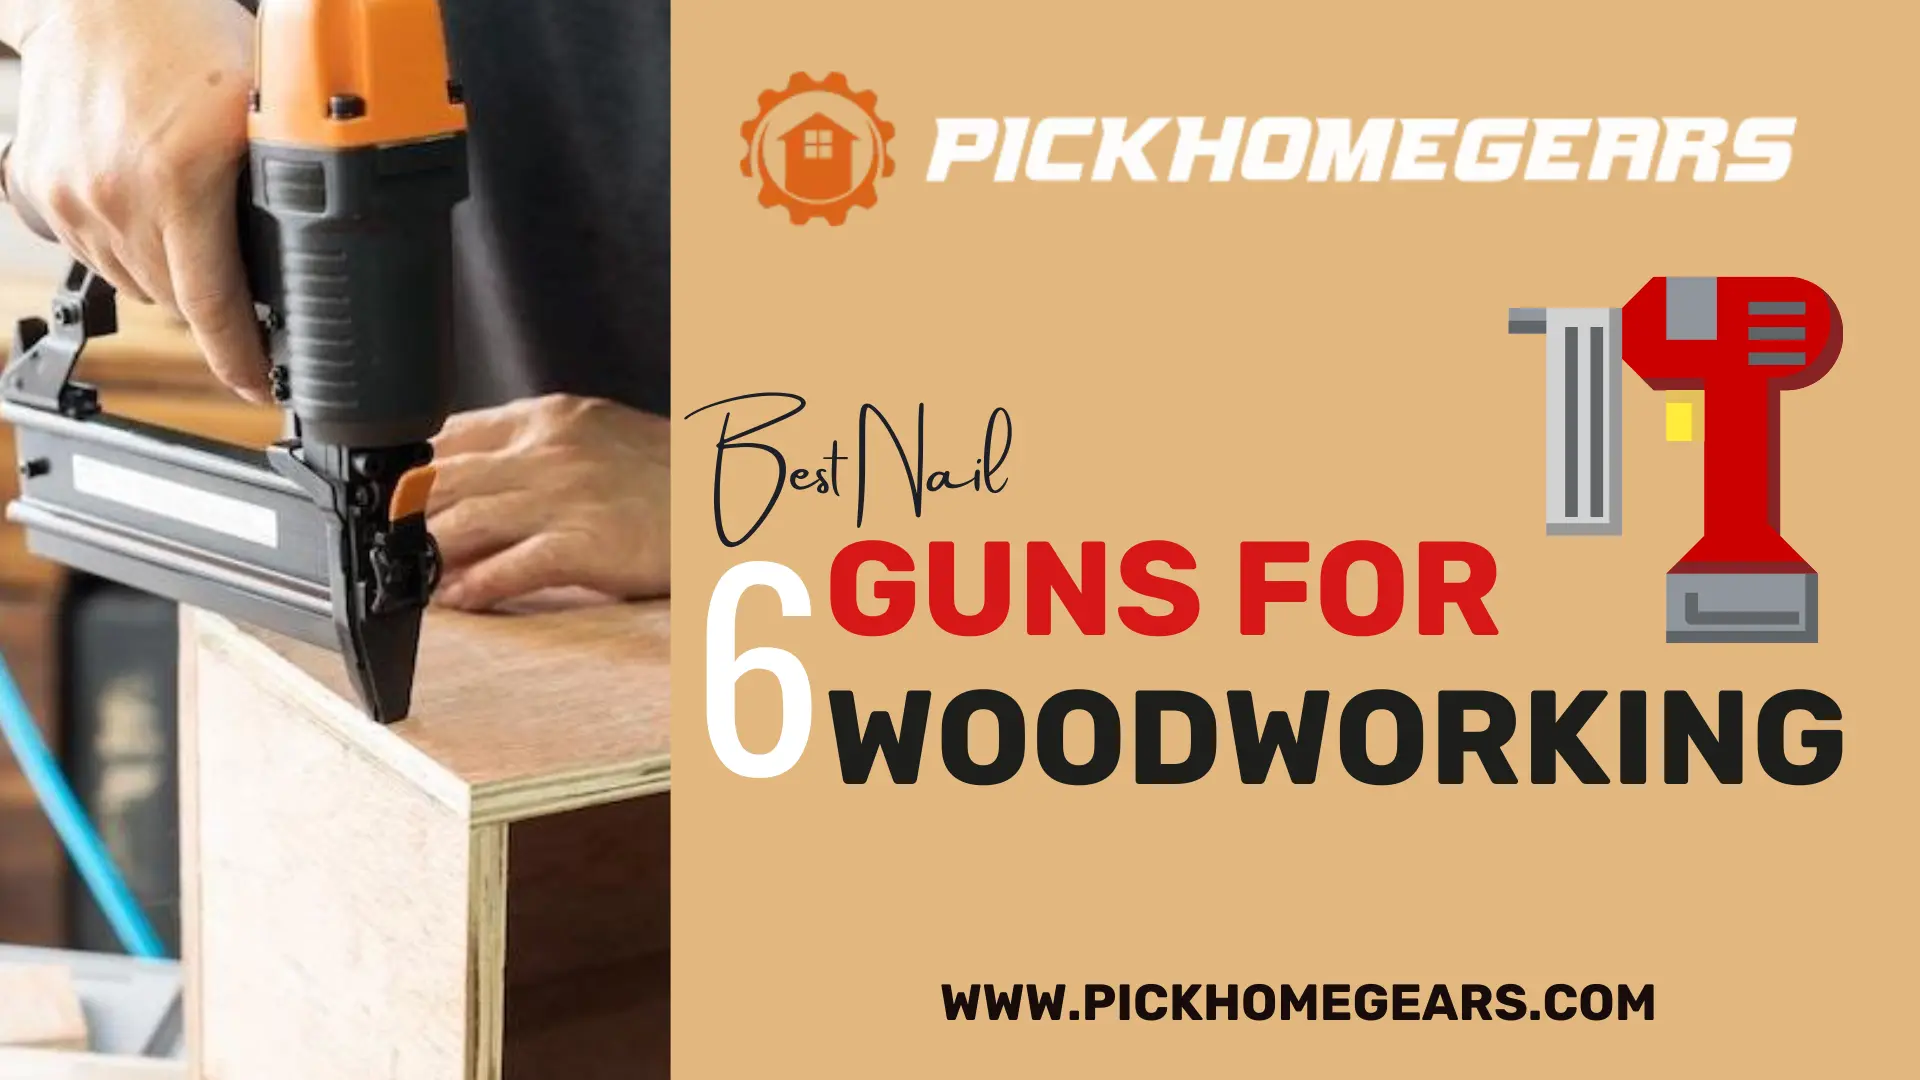 Best Nail Guns for Woodworking